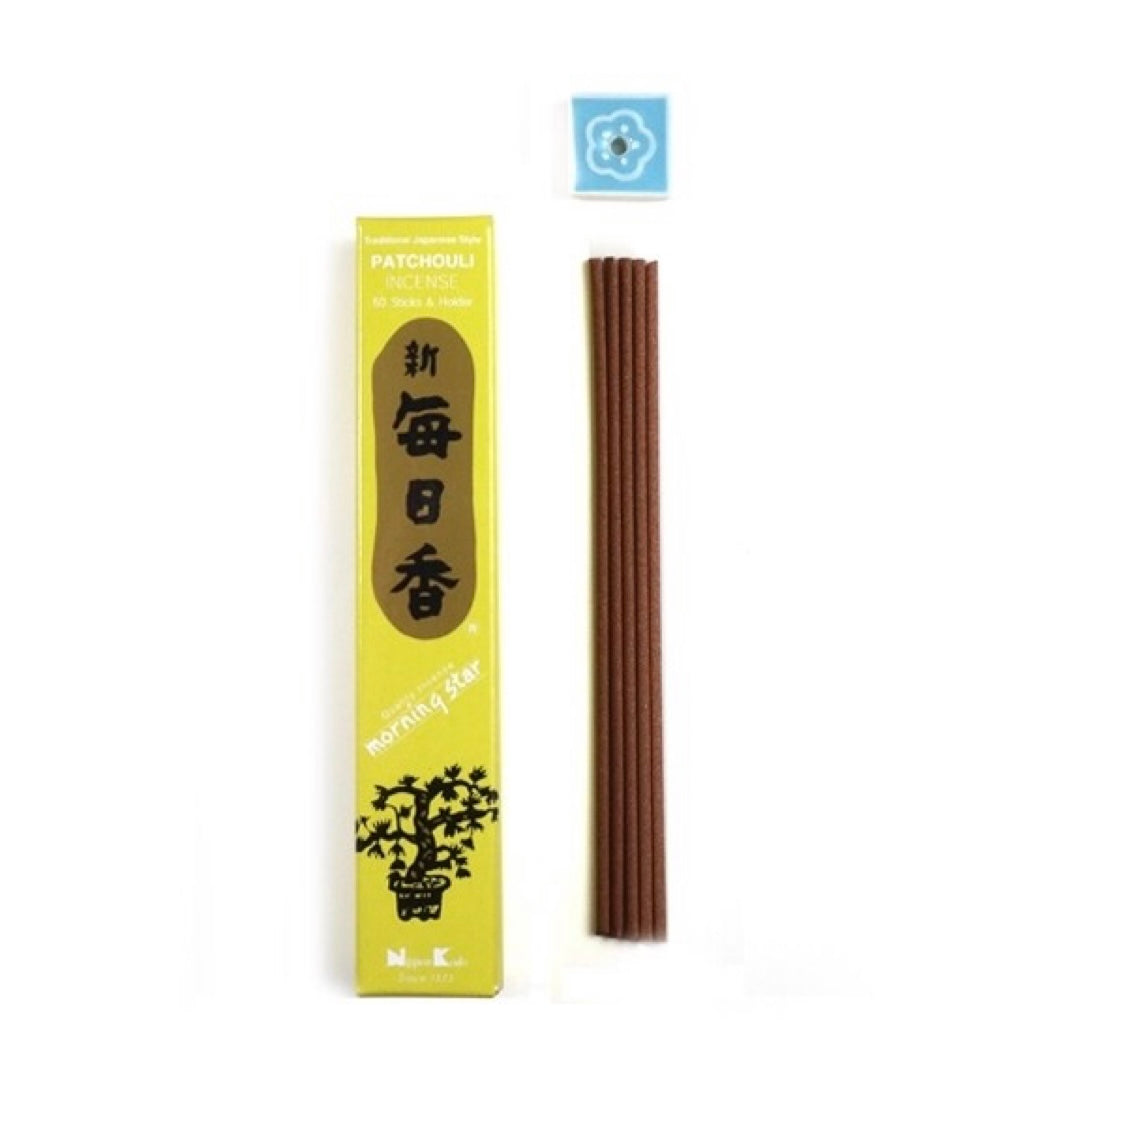 Morning Star Patchouli incenso giapponese in bastoncini - 50 stick